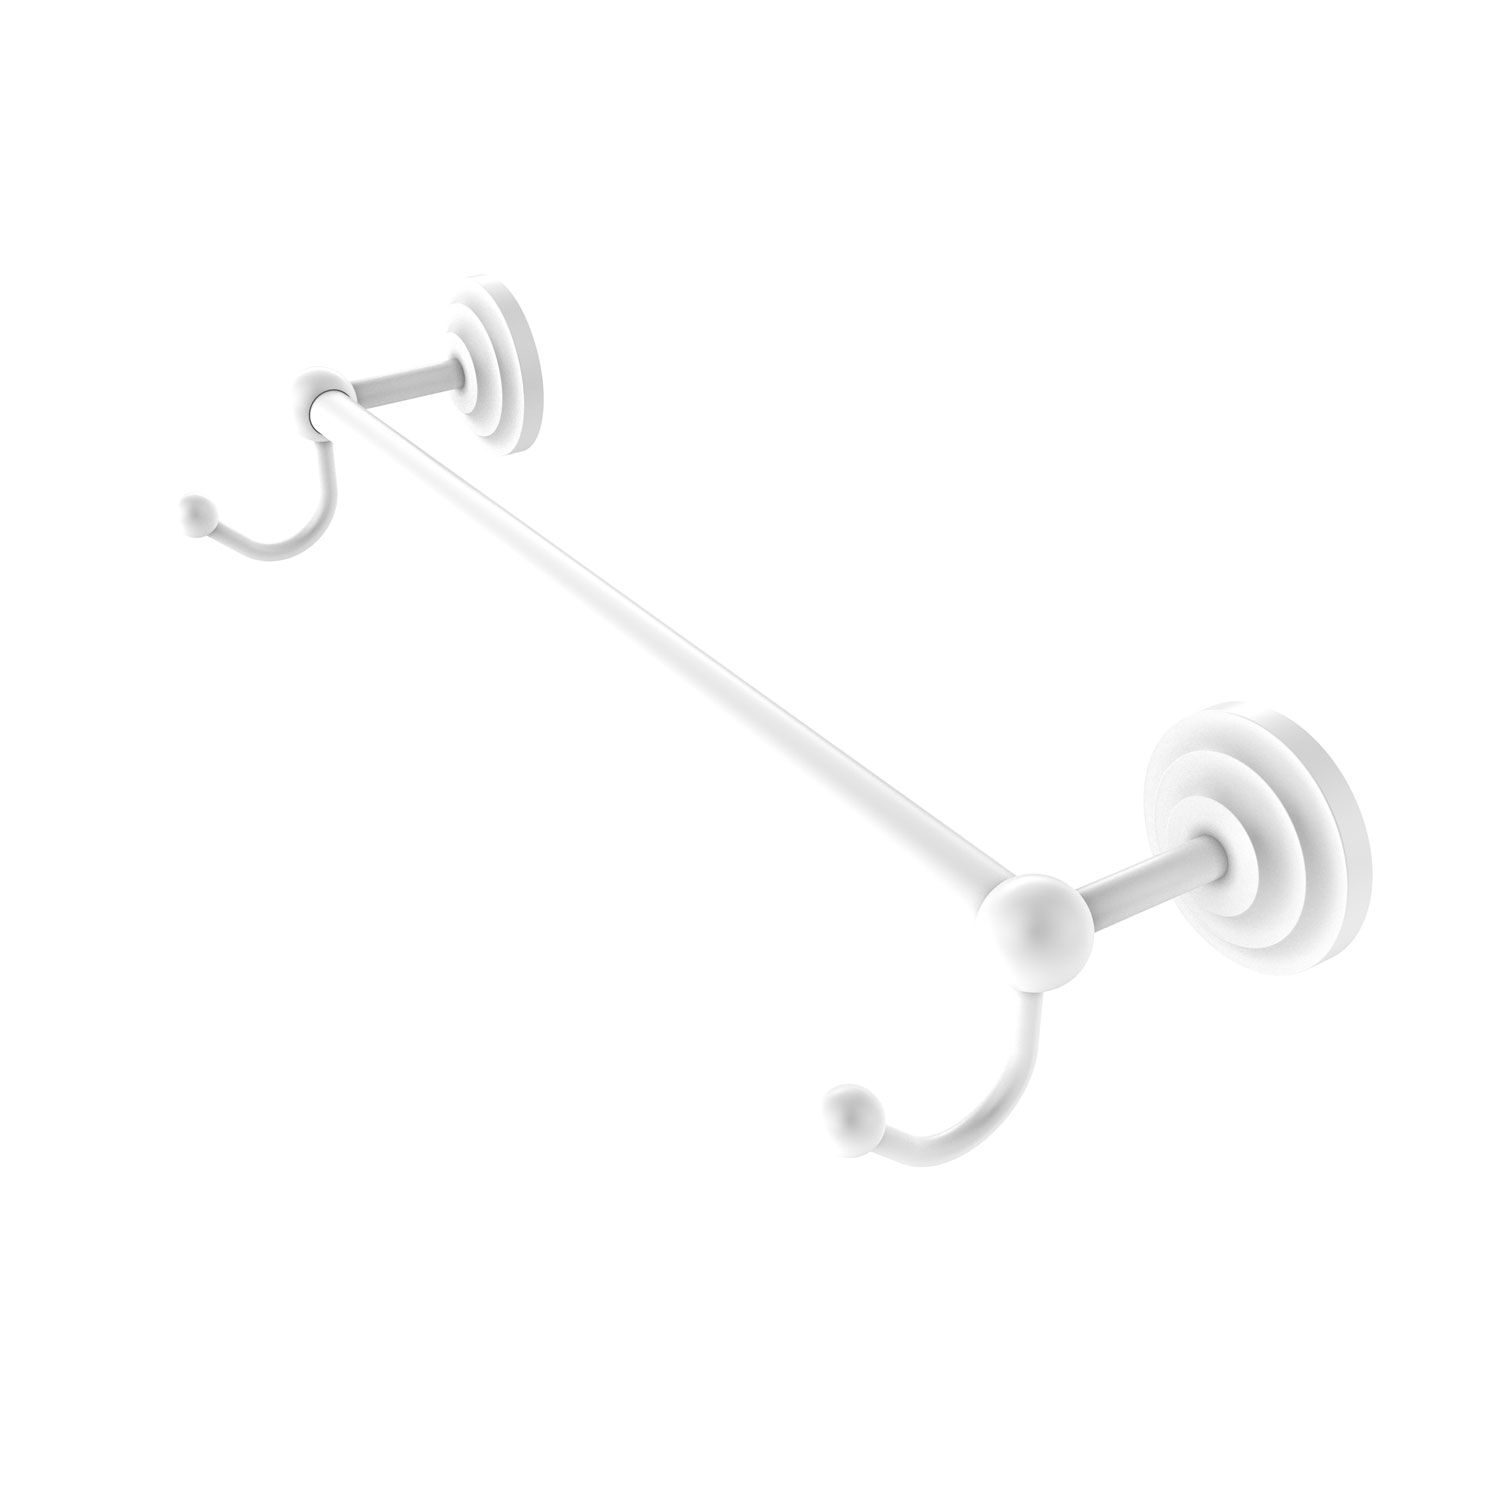 Prestige Que New Matte White 18-Inch Towel Bar with Integrated Hooks